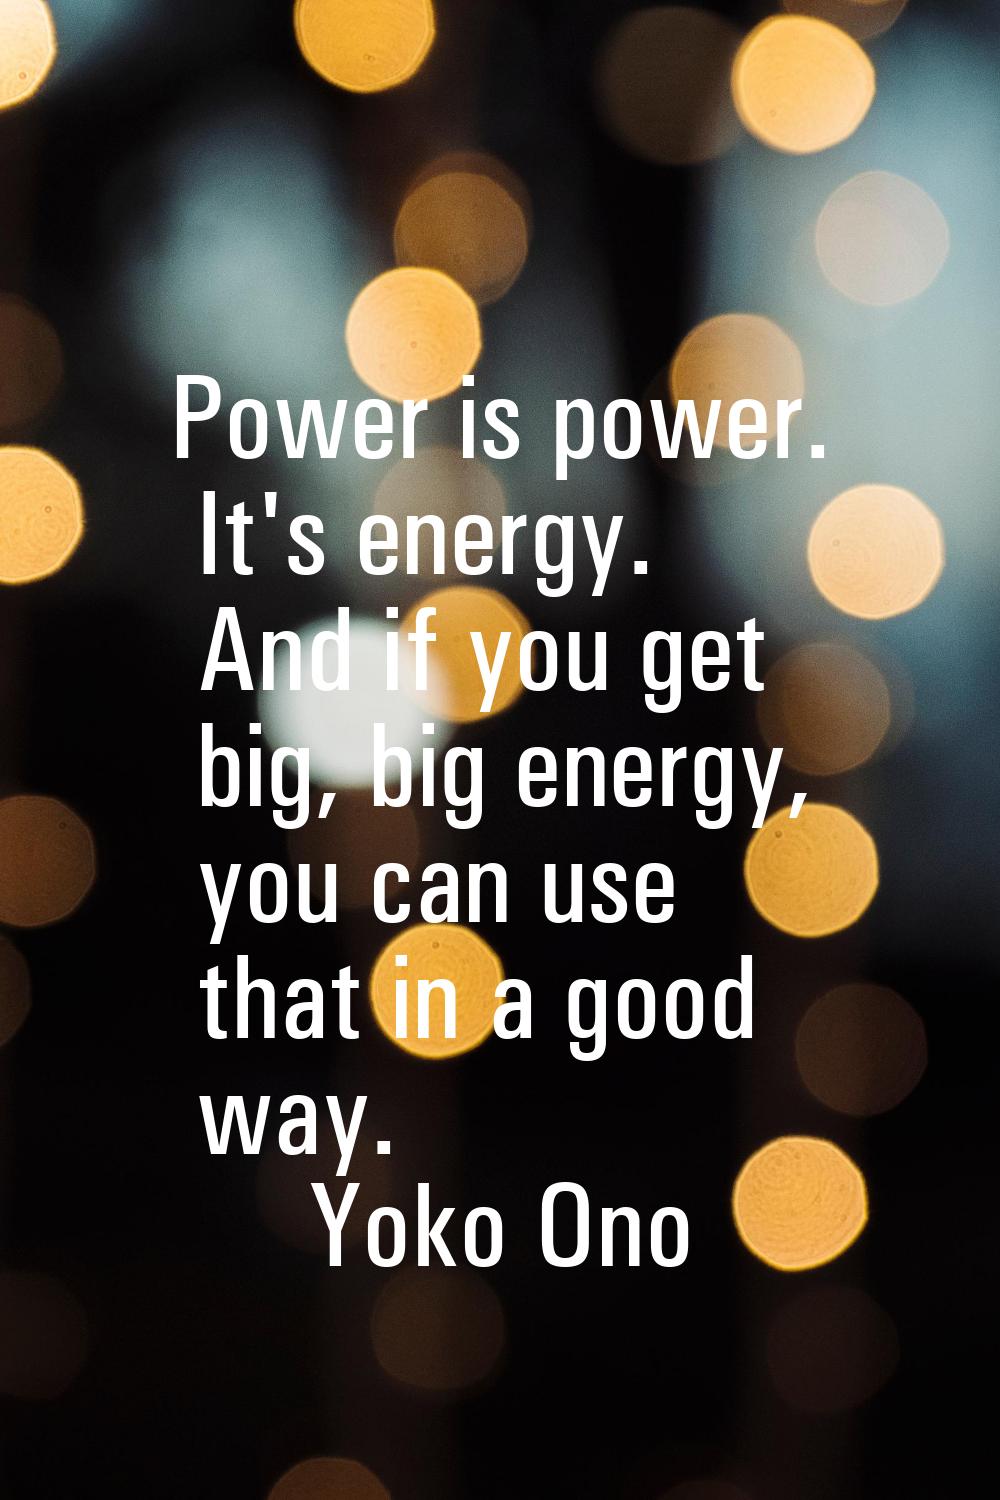 Power is power. It's energy. And if you get big, big energy, you can use that in a good way.